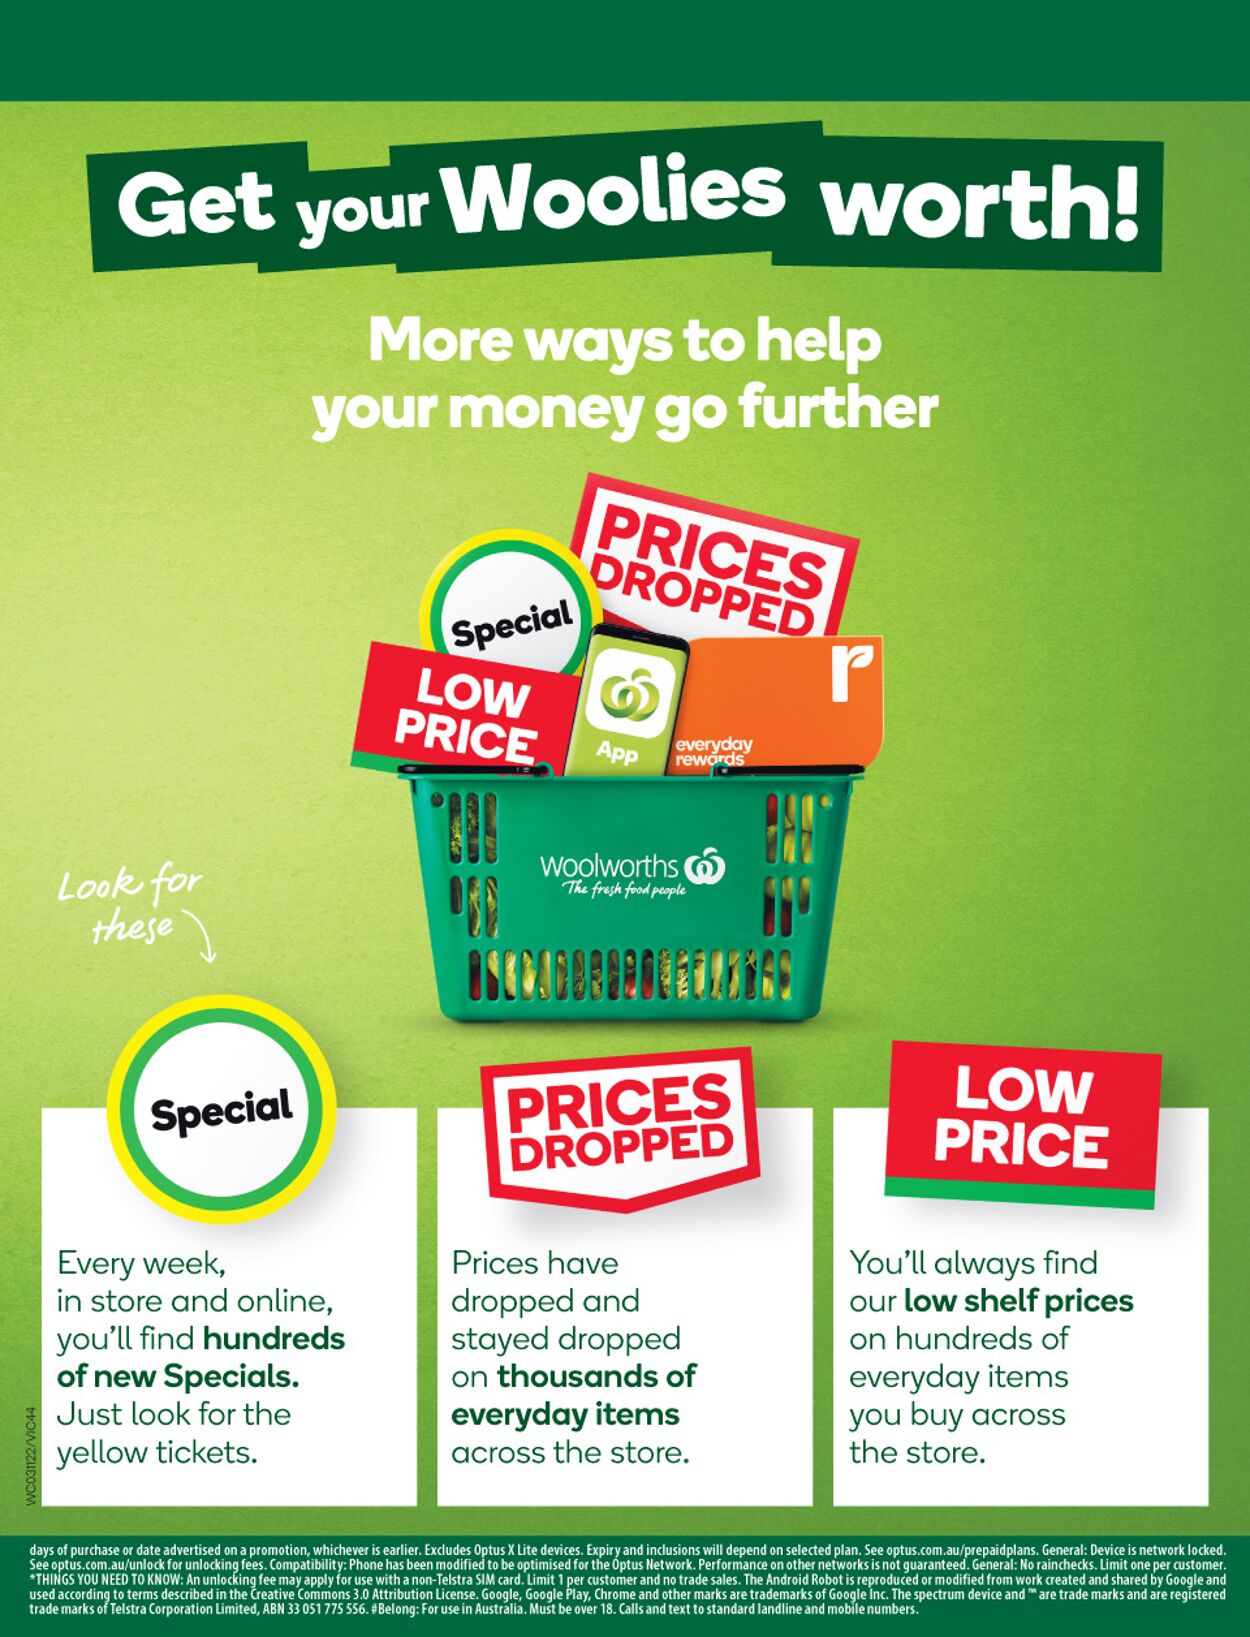 Catalogue Woolworths 03.11.2021 - 09.11.2021